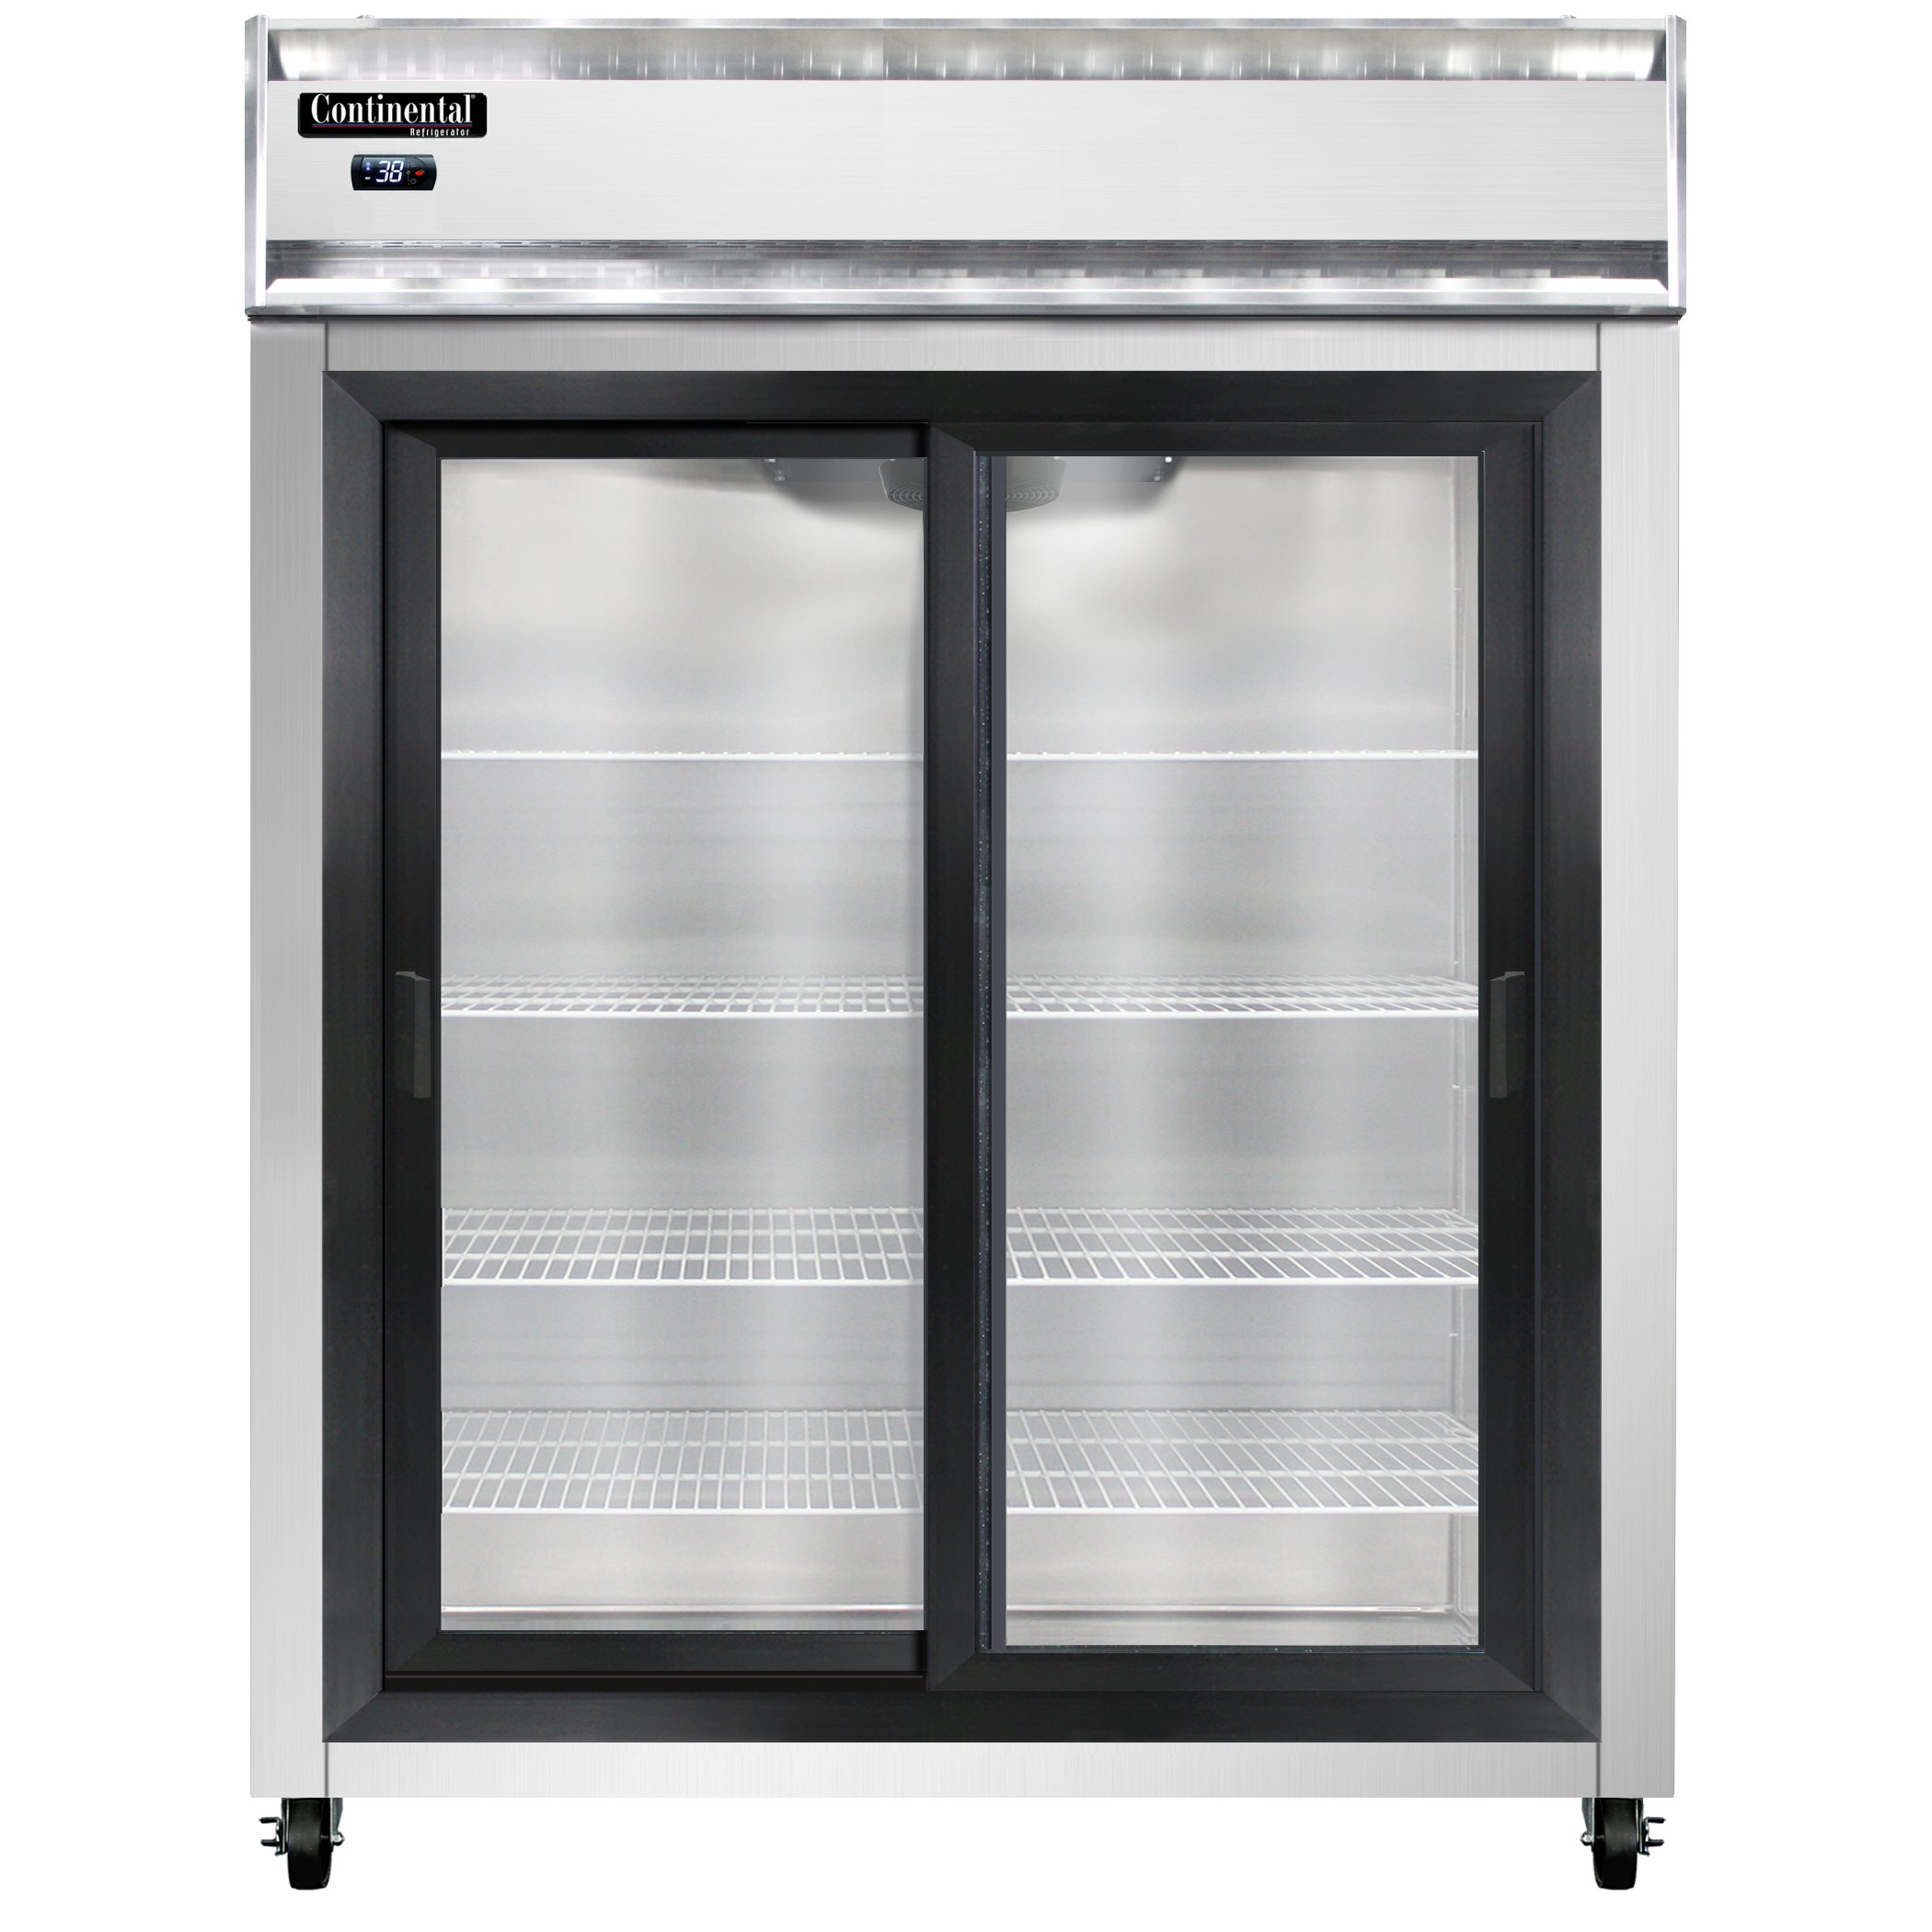 Continental 2RENSGD 57″ 2 Section Sliding Glass Door Wide Reach-In Refrigerator